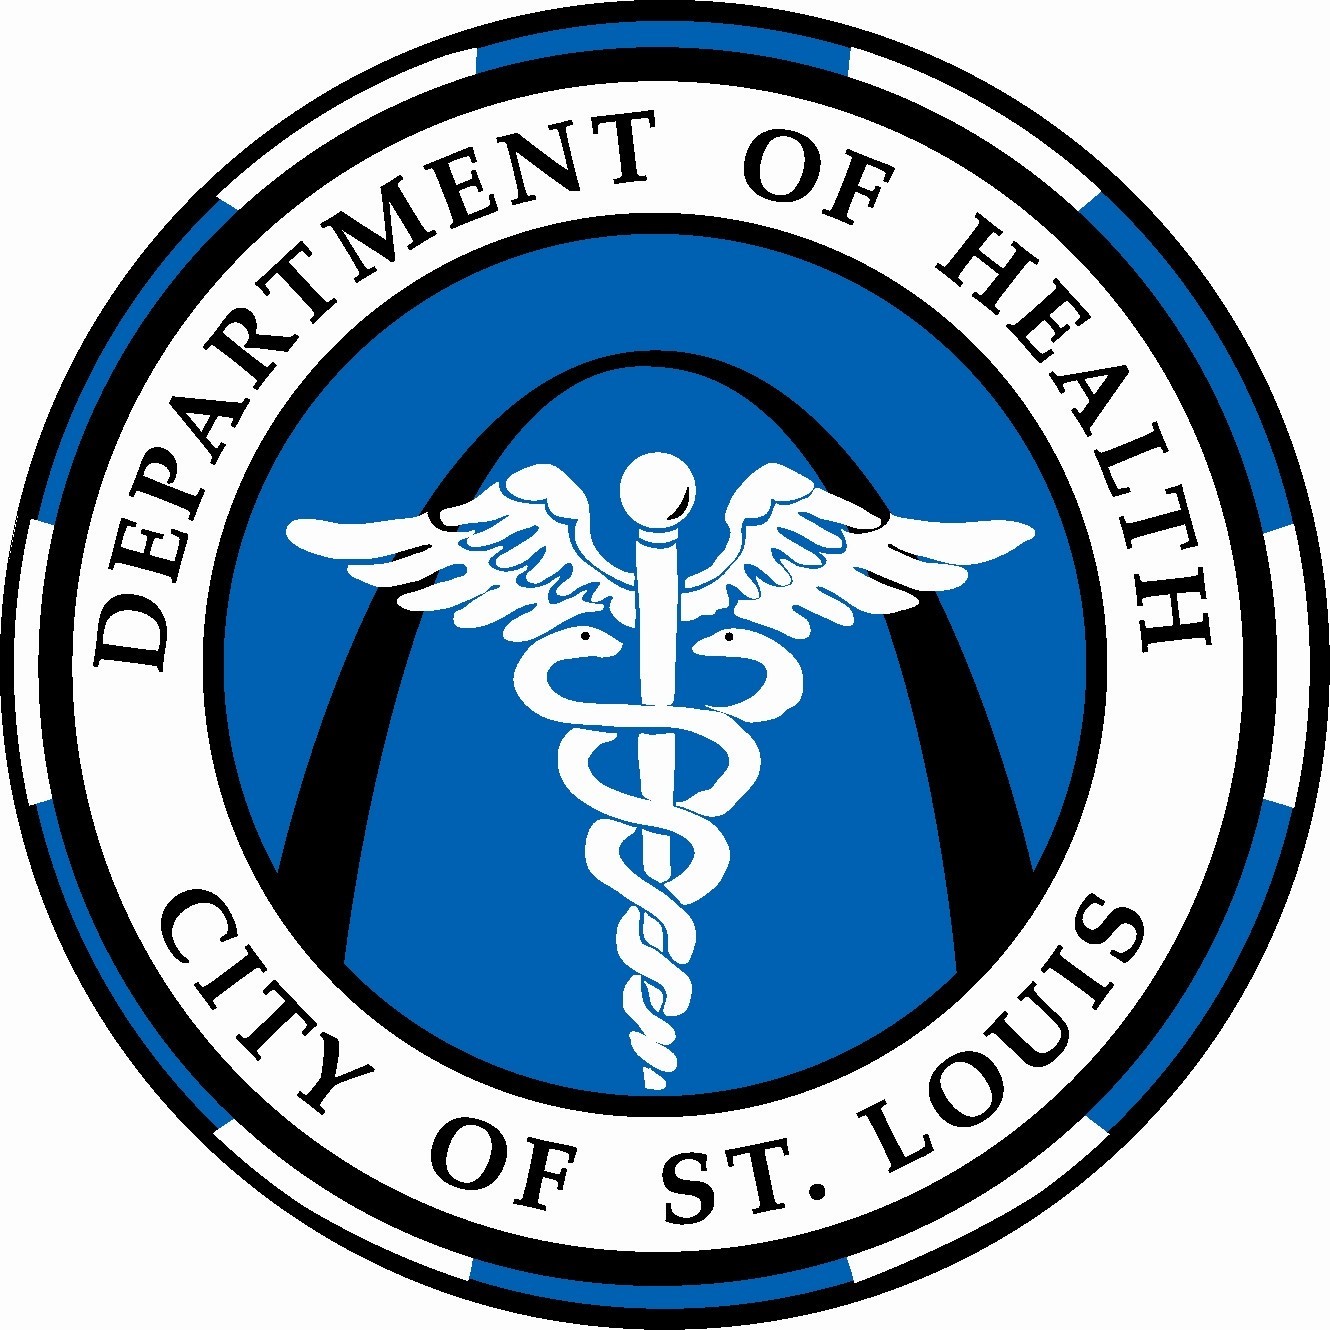 City of St. Louis Department of Health logo